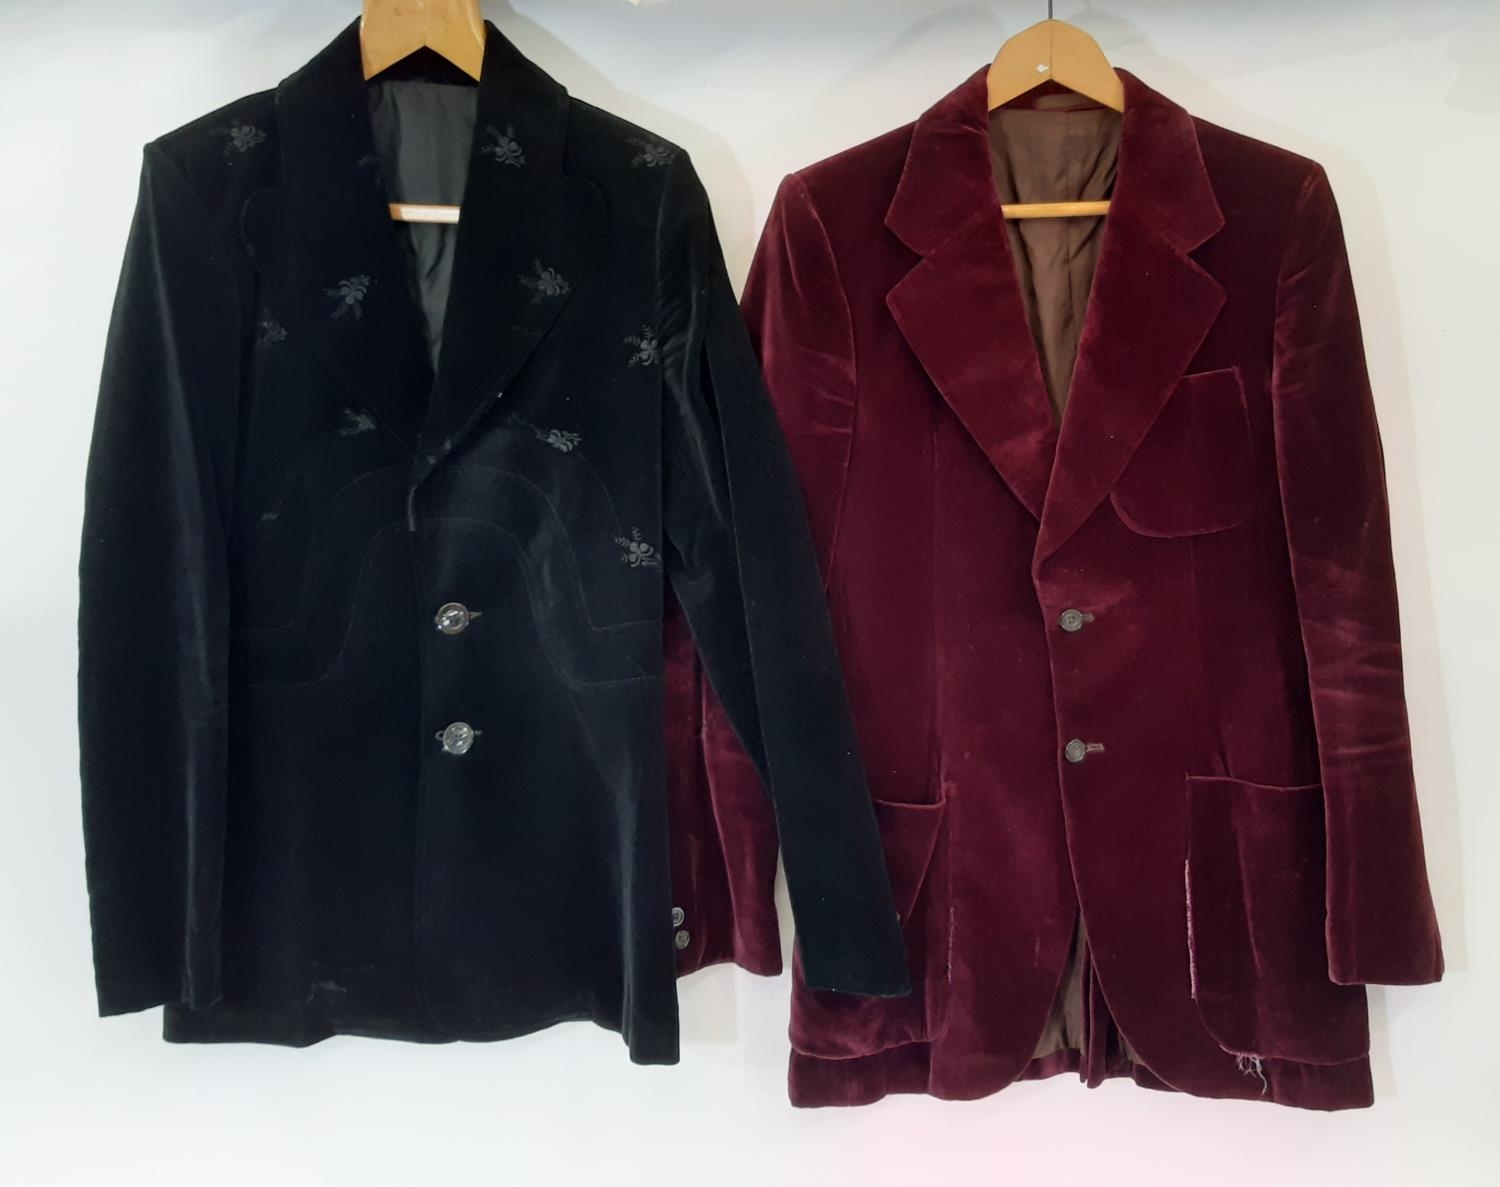 Mixed lot of men's vintage clothing including a black velvet smoking jacket designed by Malcolm Hall - Image 2 of 5